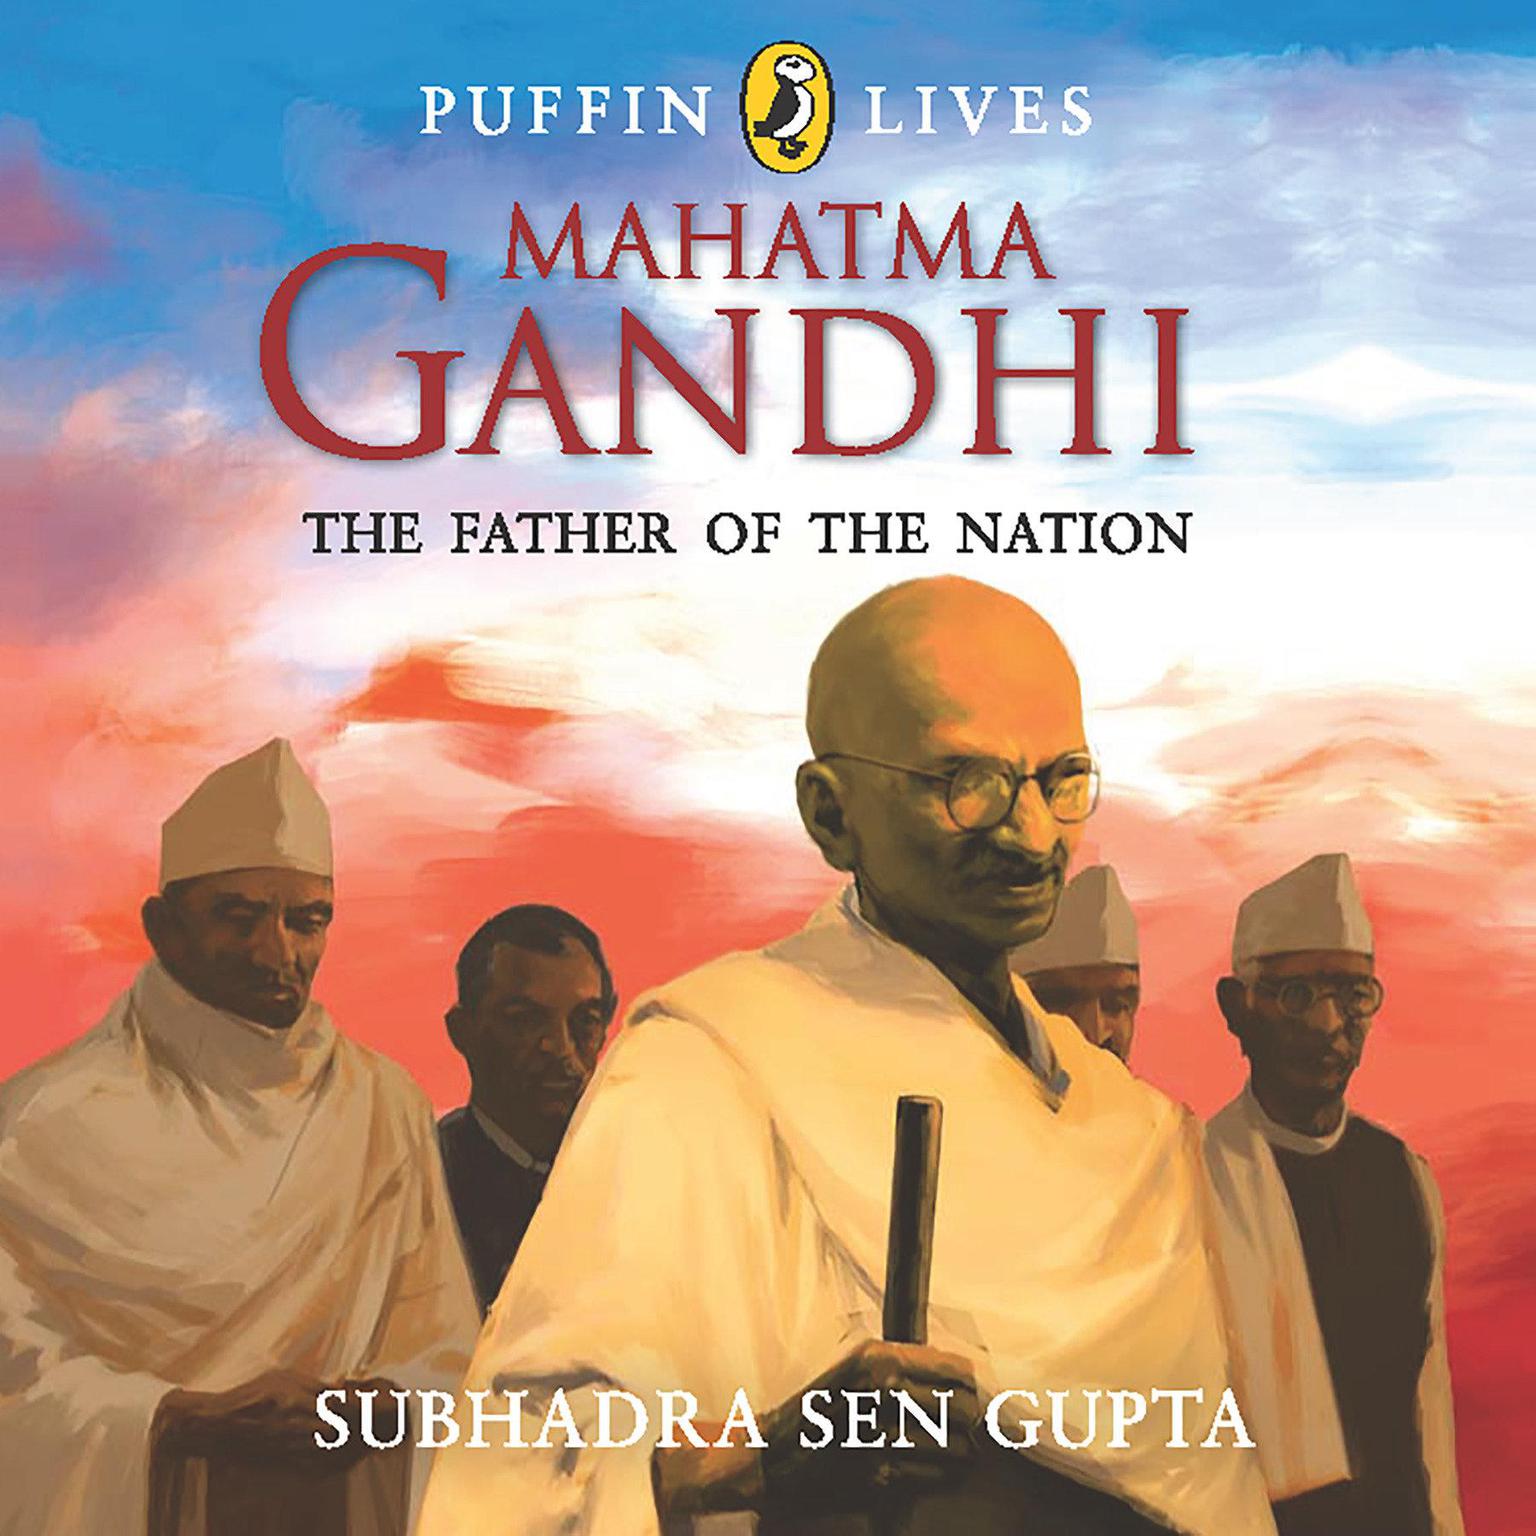 Puffin Lives: Mahatma Gandhi: The Father of The Nation Audiobook, by Subhadra Sen Gupta